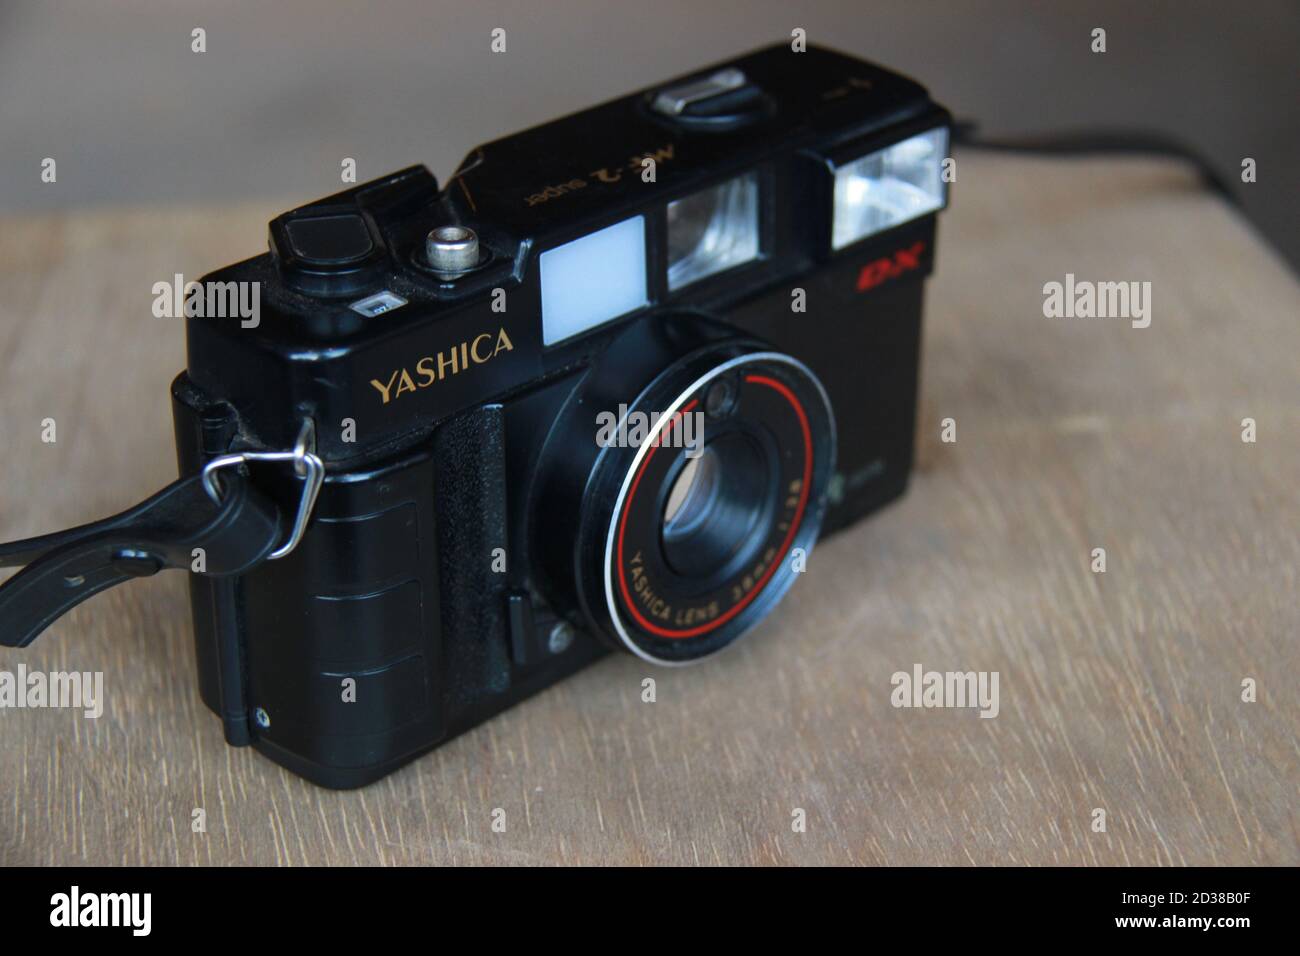 Yashica analog camera with a 38mm lens. pocket camera products that use  film roll. Sidoarjo, Indonesia. June 2020 Stock Photo - Alamy